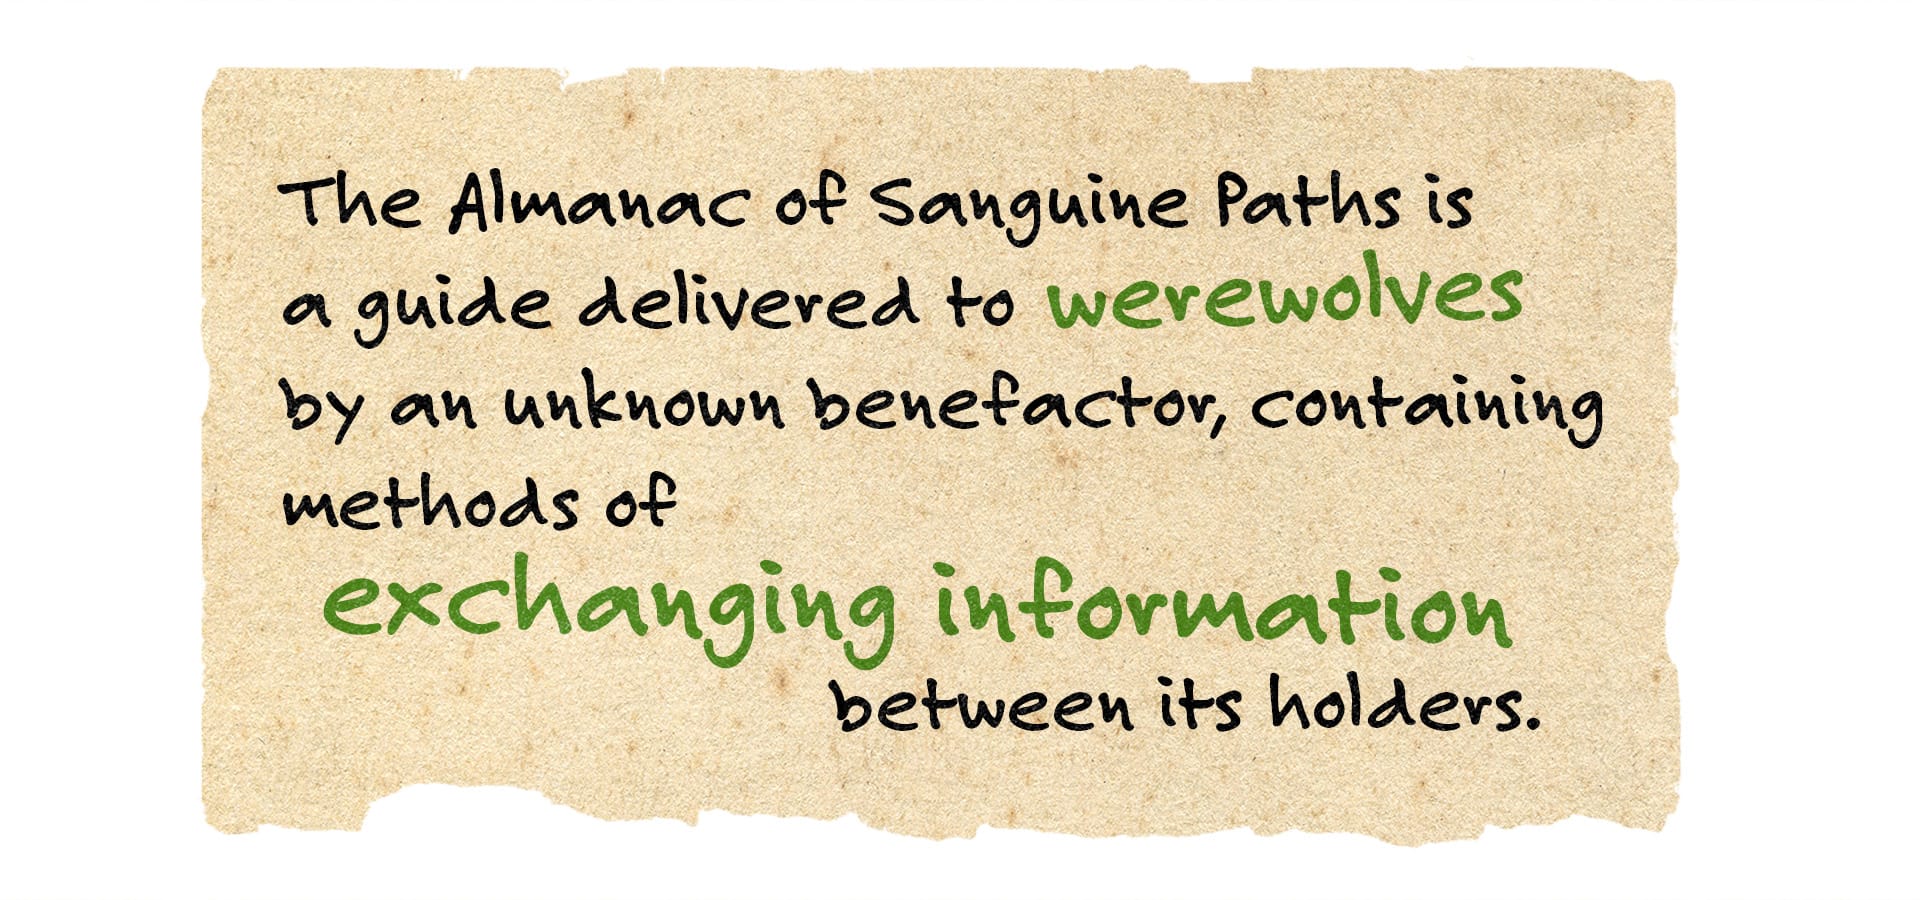 The Almanac of Sanguine Paths is a guide delivered to werewolves by an unknown benefactor, containing methods of exchanging information between its holders.